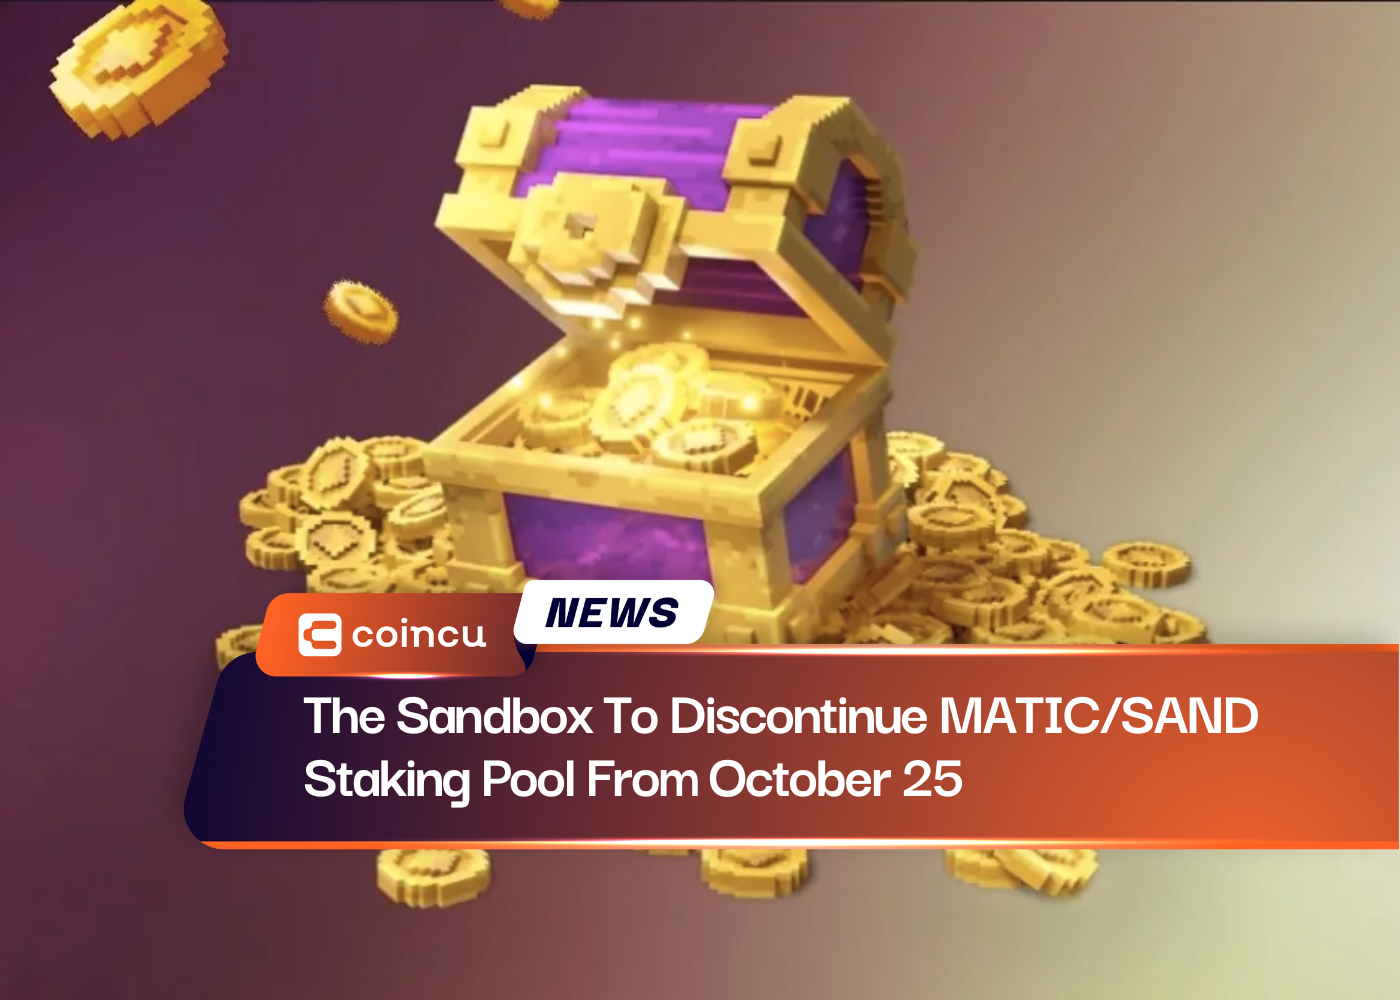 The Sandbox To Discontinue MATIC/SAND Staking Pool From October 25